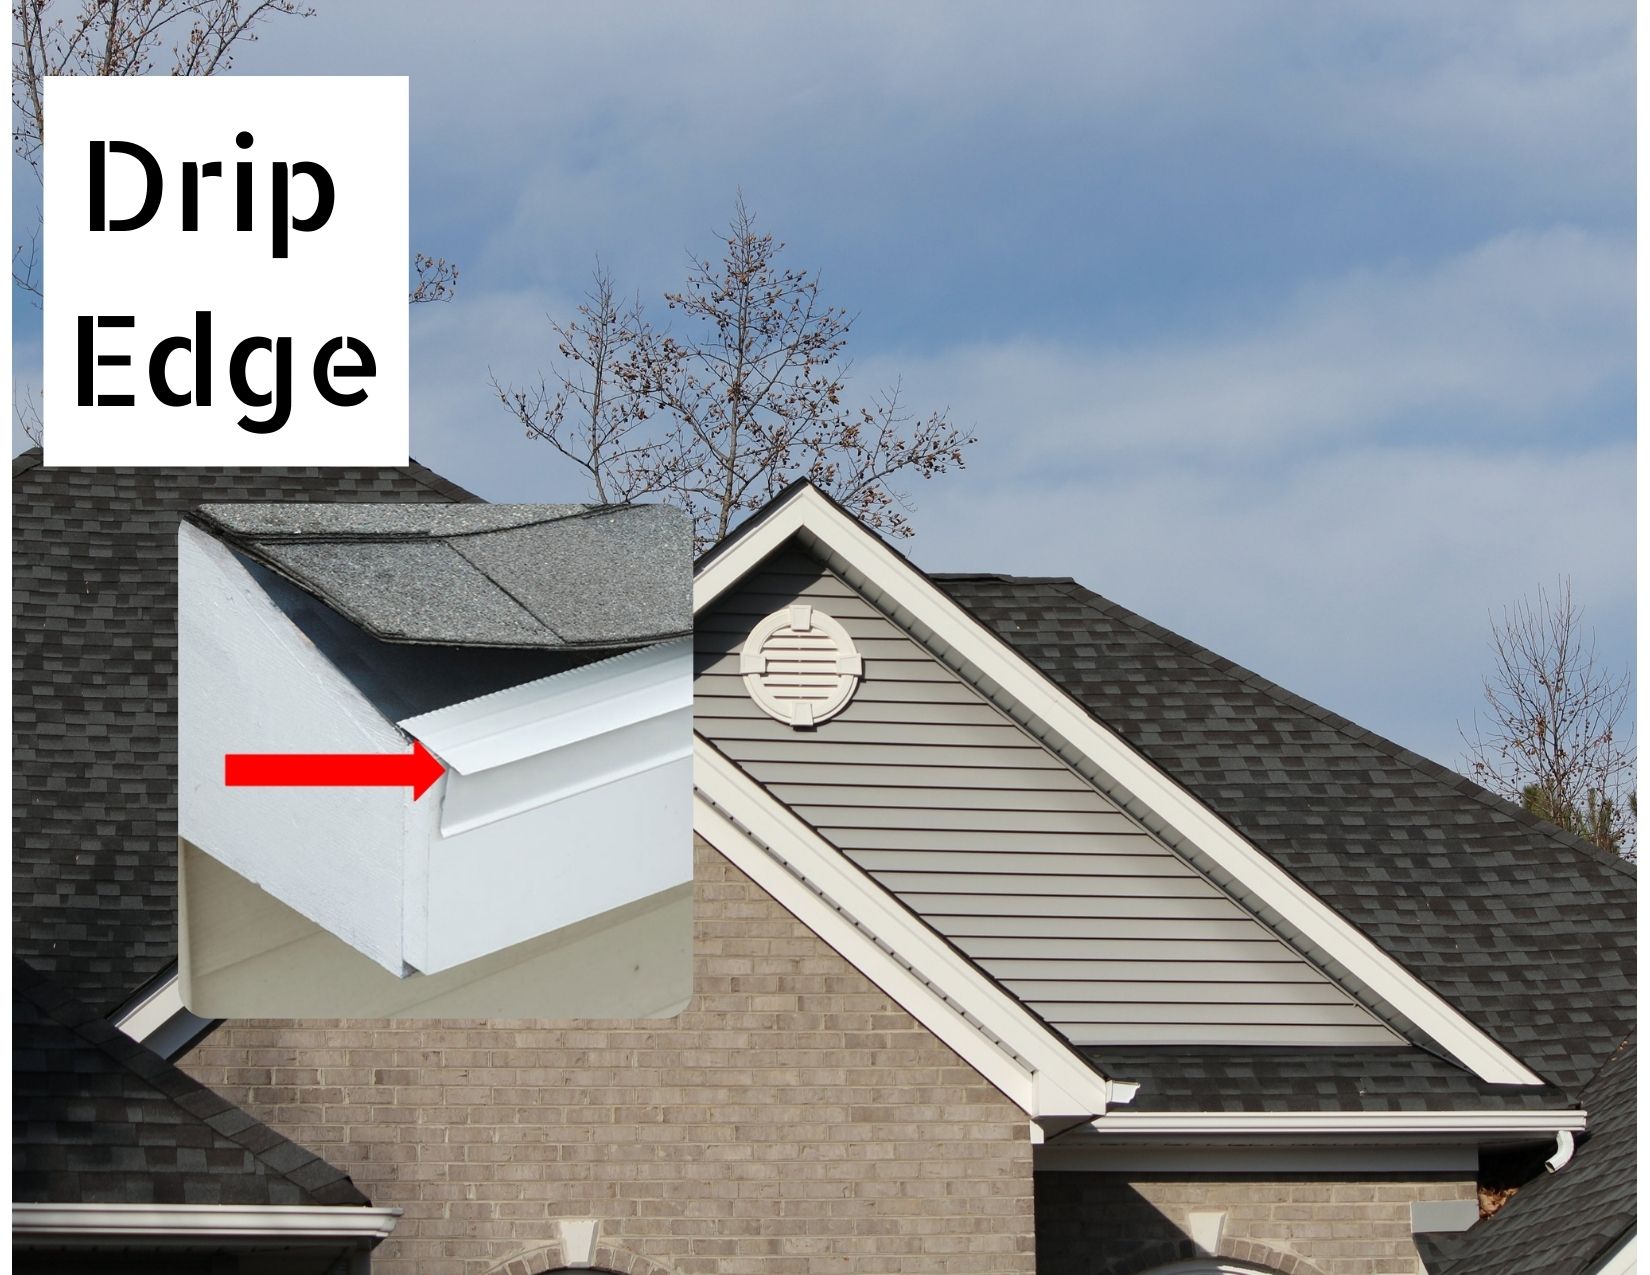 Drip Edge and Why You Need It